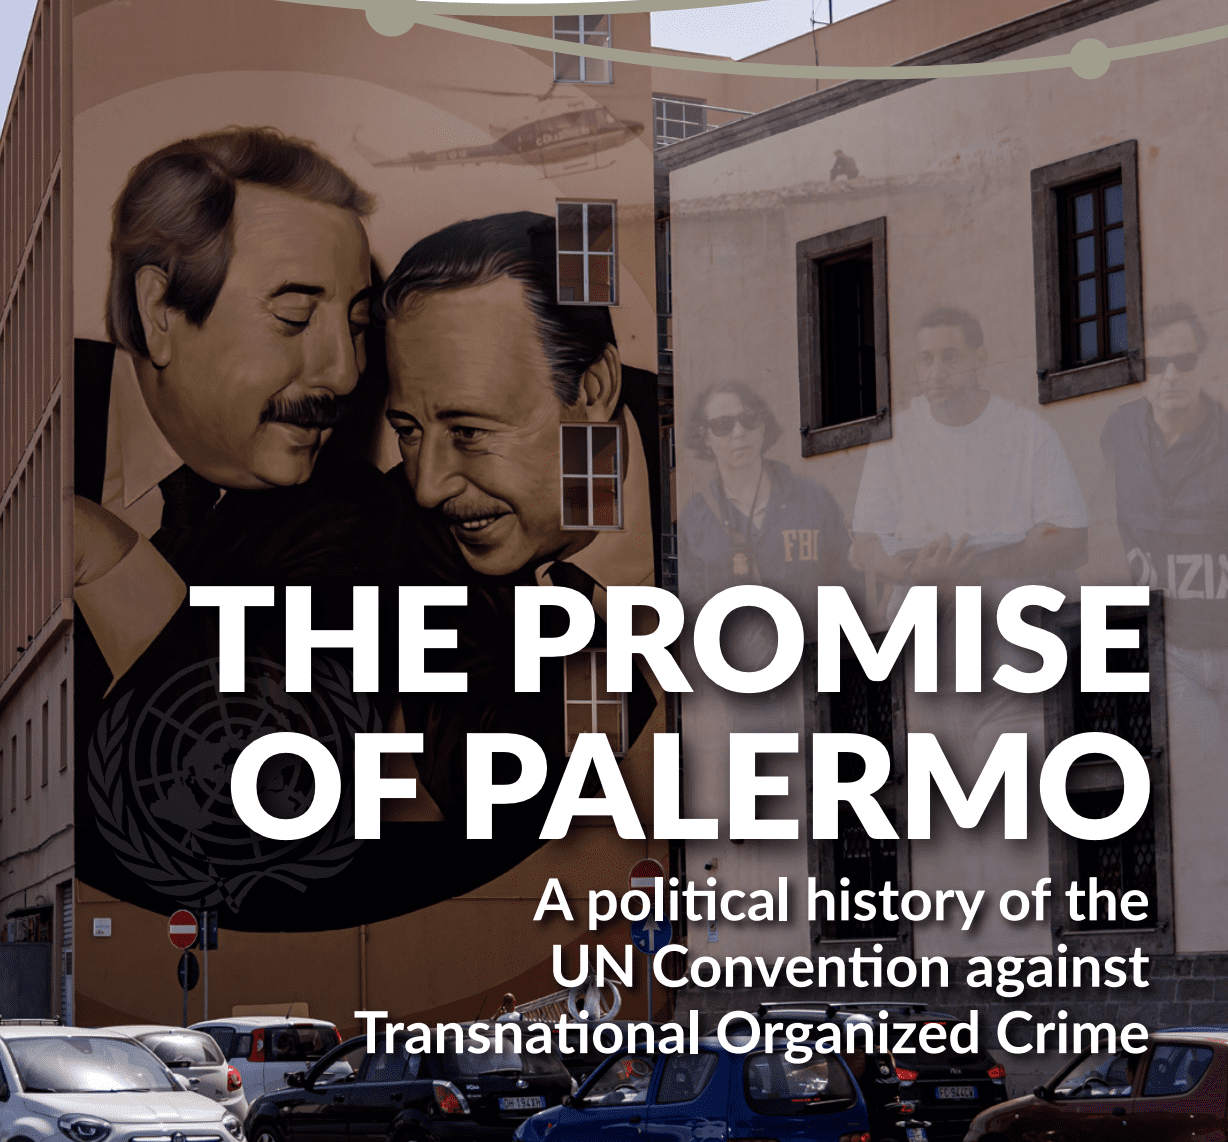 The promise of Palermo. A political history of the UN Convention against Transnational Organized Crime